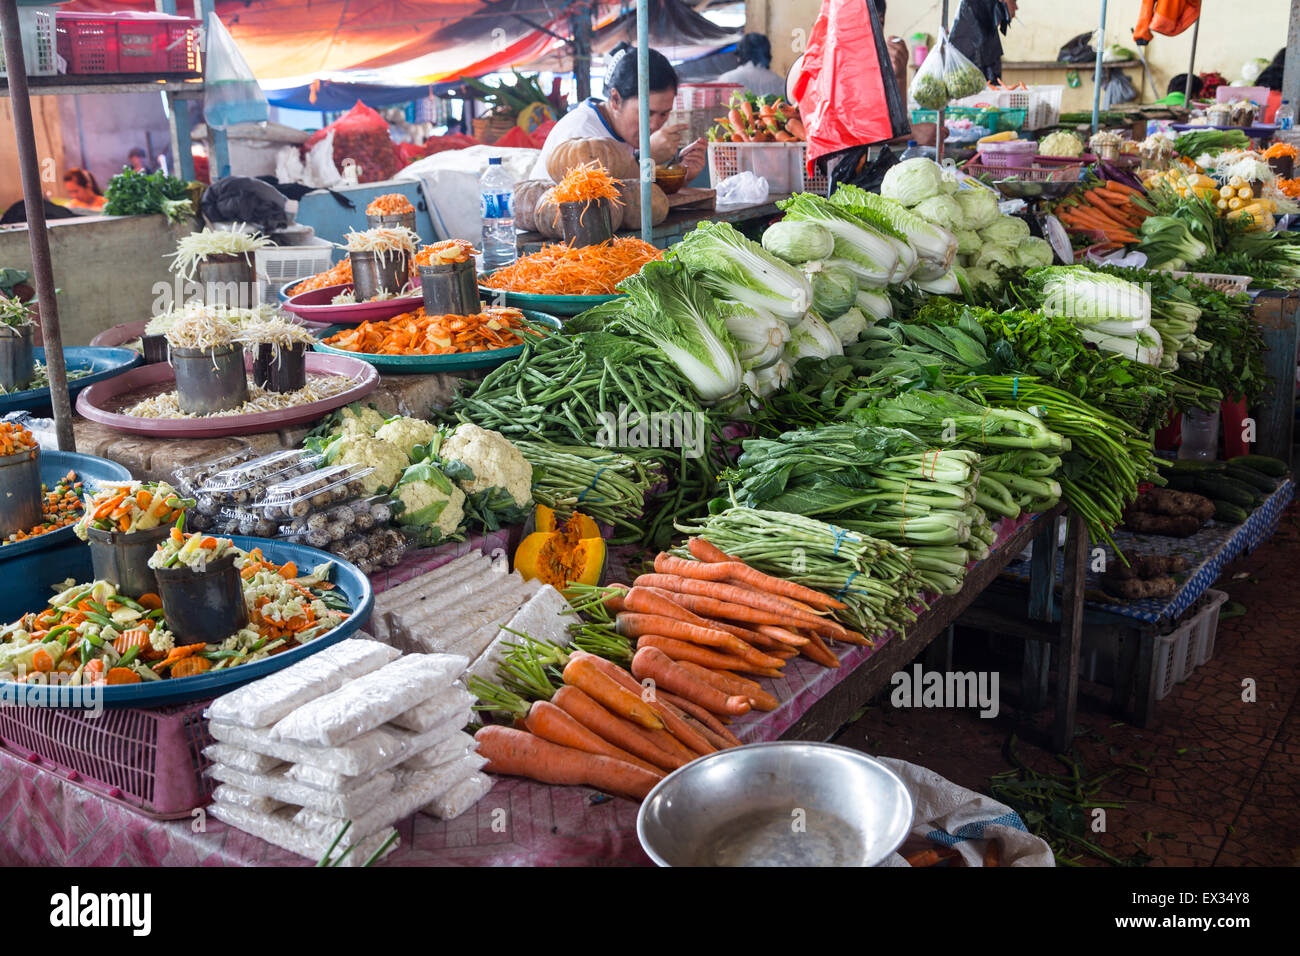 Vegetables are displayed at the Tomohon Market in the Minahasa Highlands or North Sulawesi, Indonesia. Stock Photo